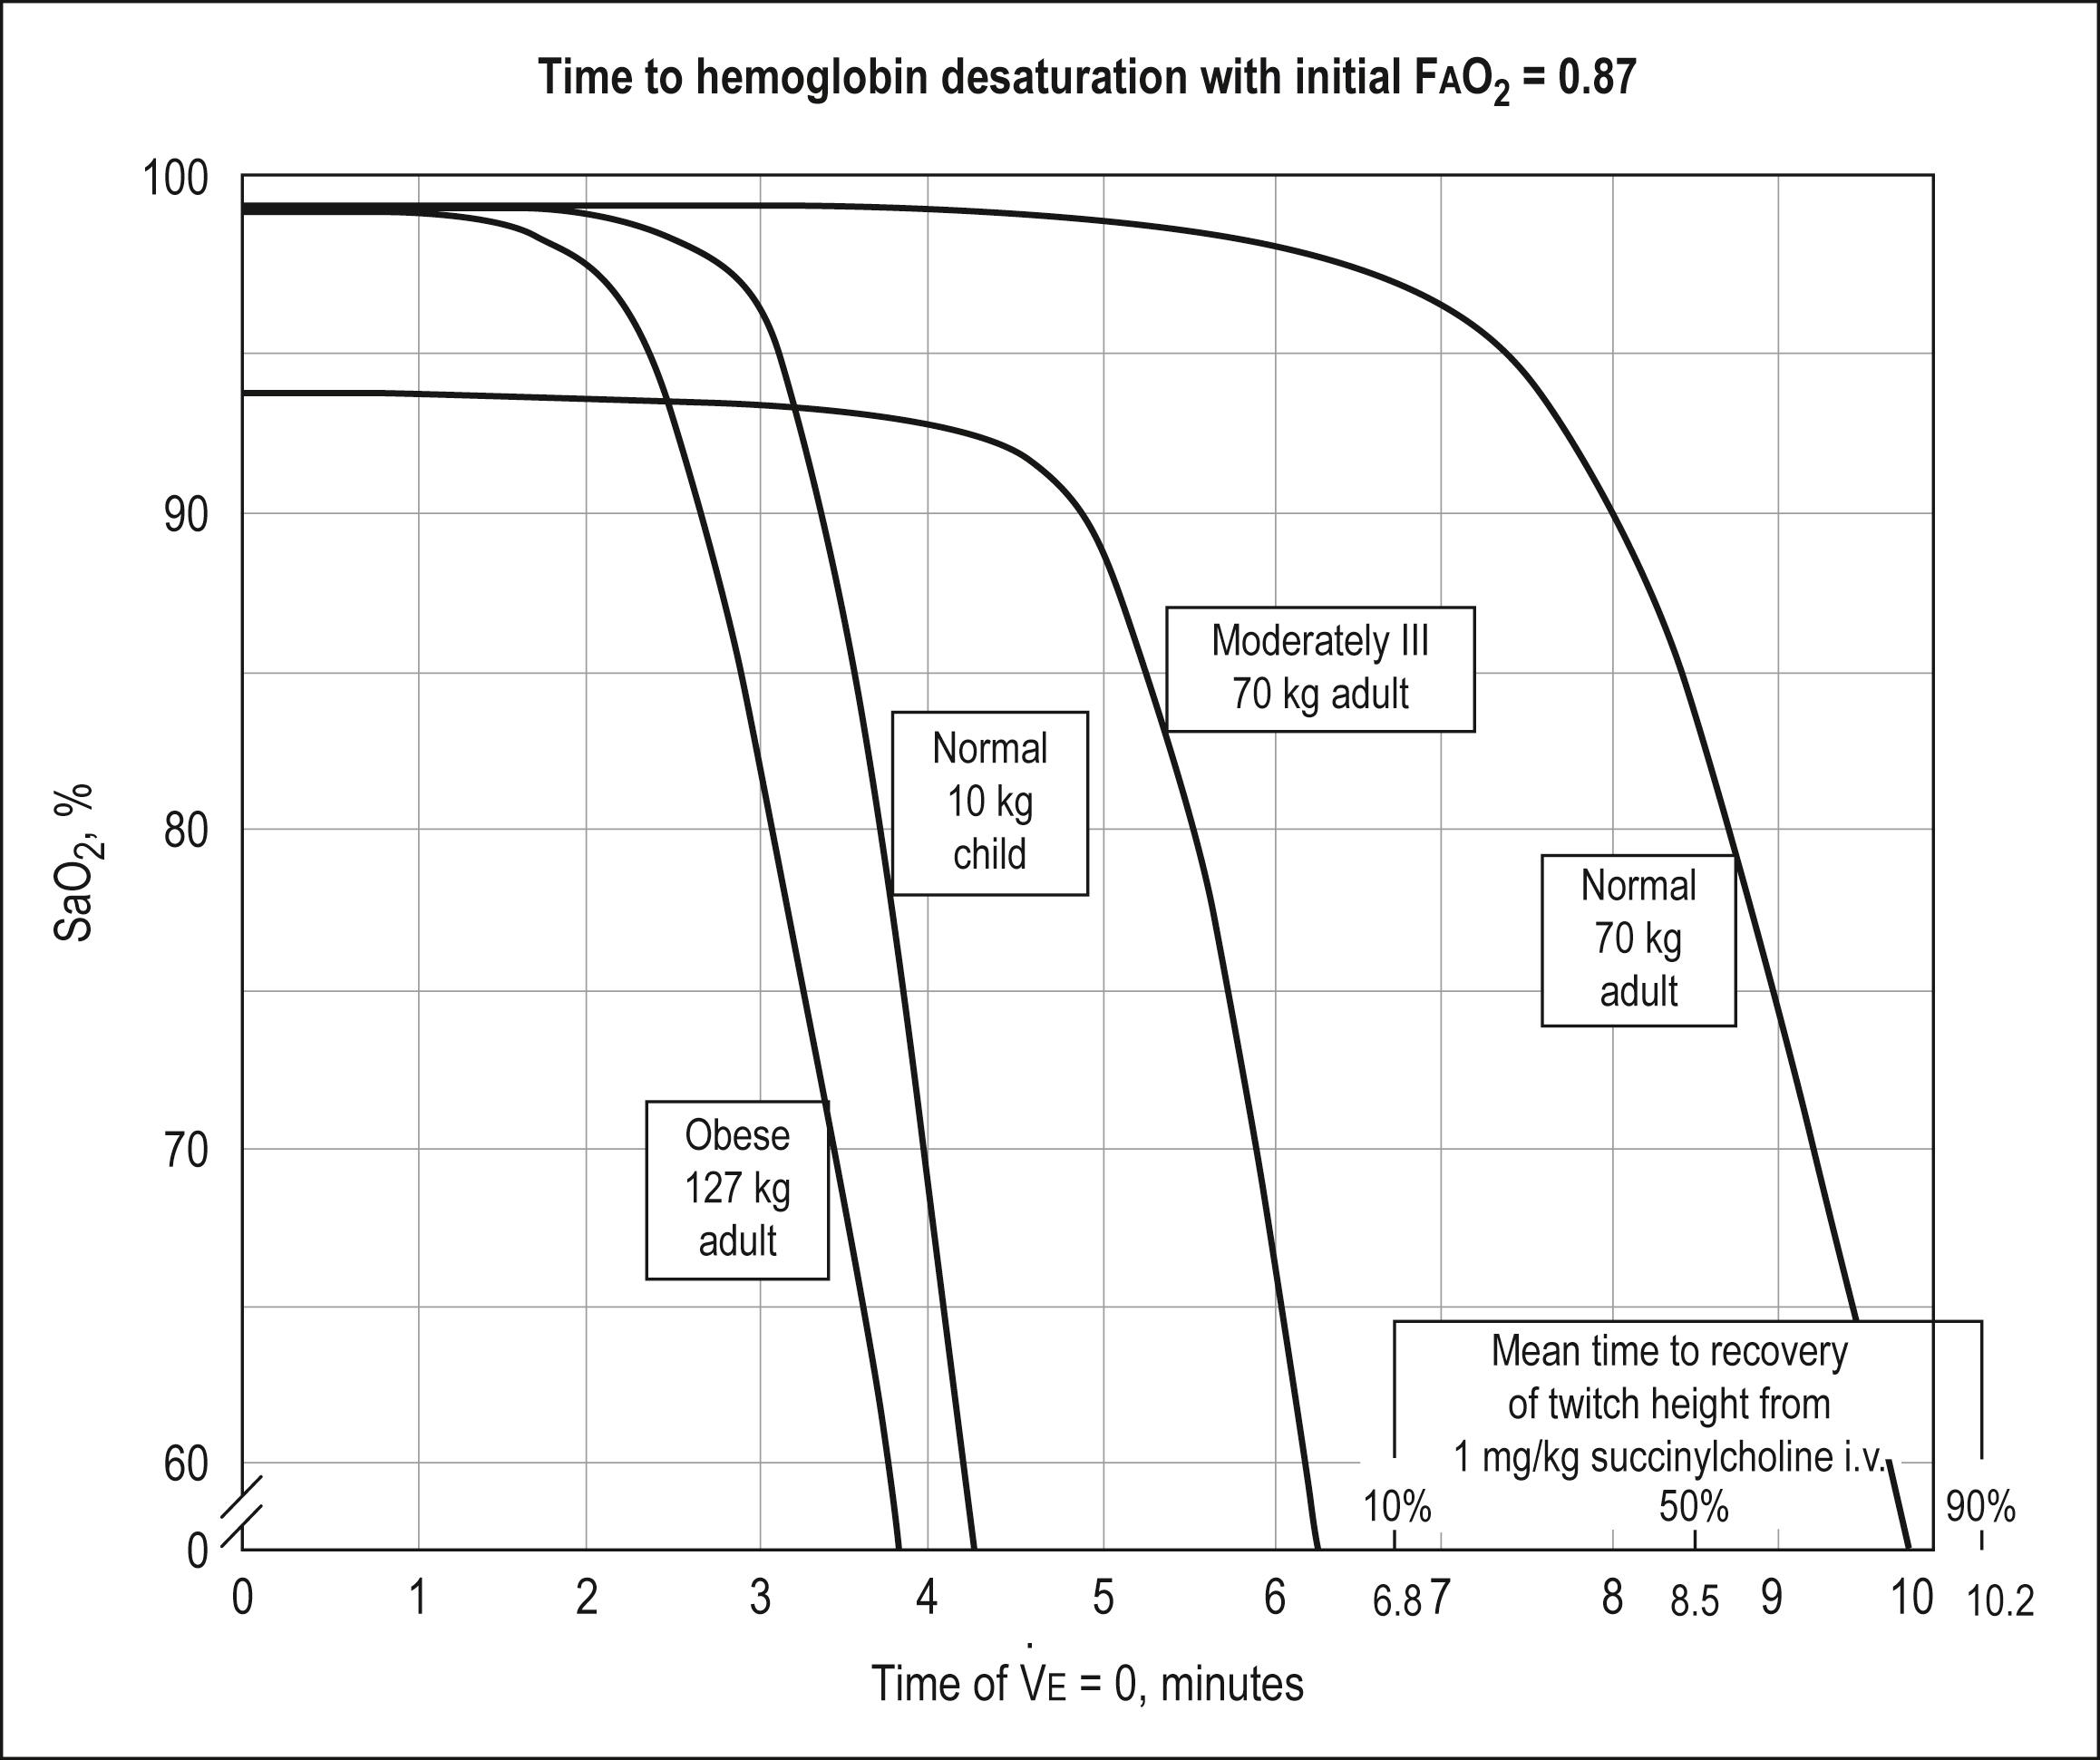 Fig. 2.1.2, SaO2 versus time of apnoea for various types of patients.